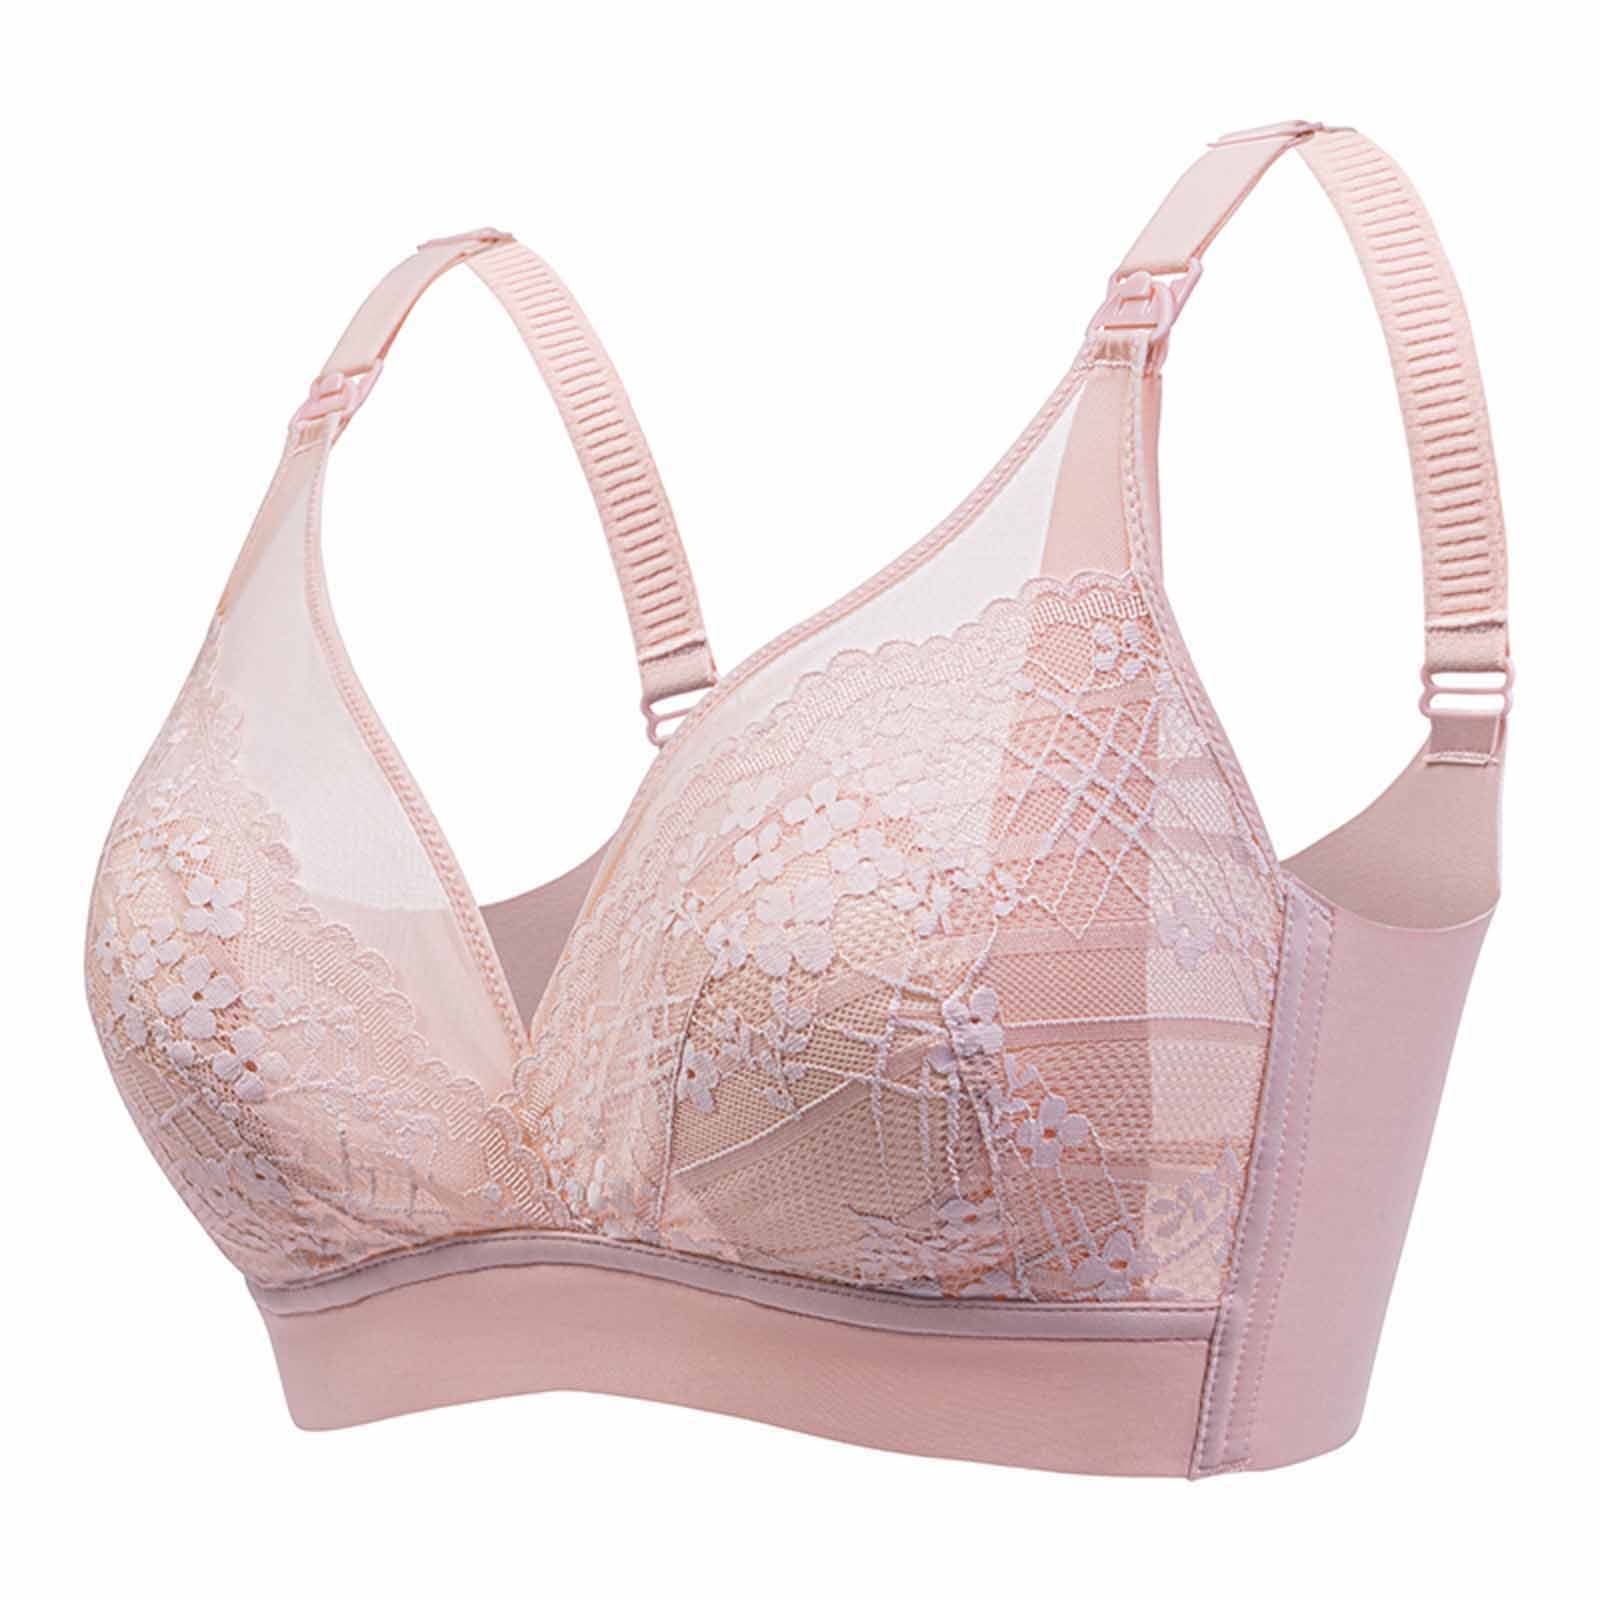 VerPetridure Strapless Bras for Women Women's Sexy Ultra-thin Lace